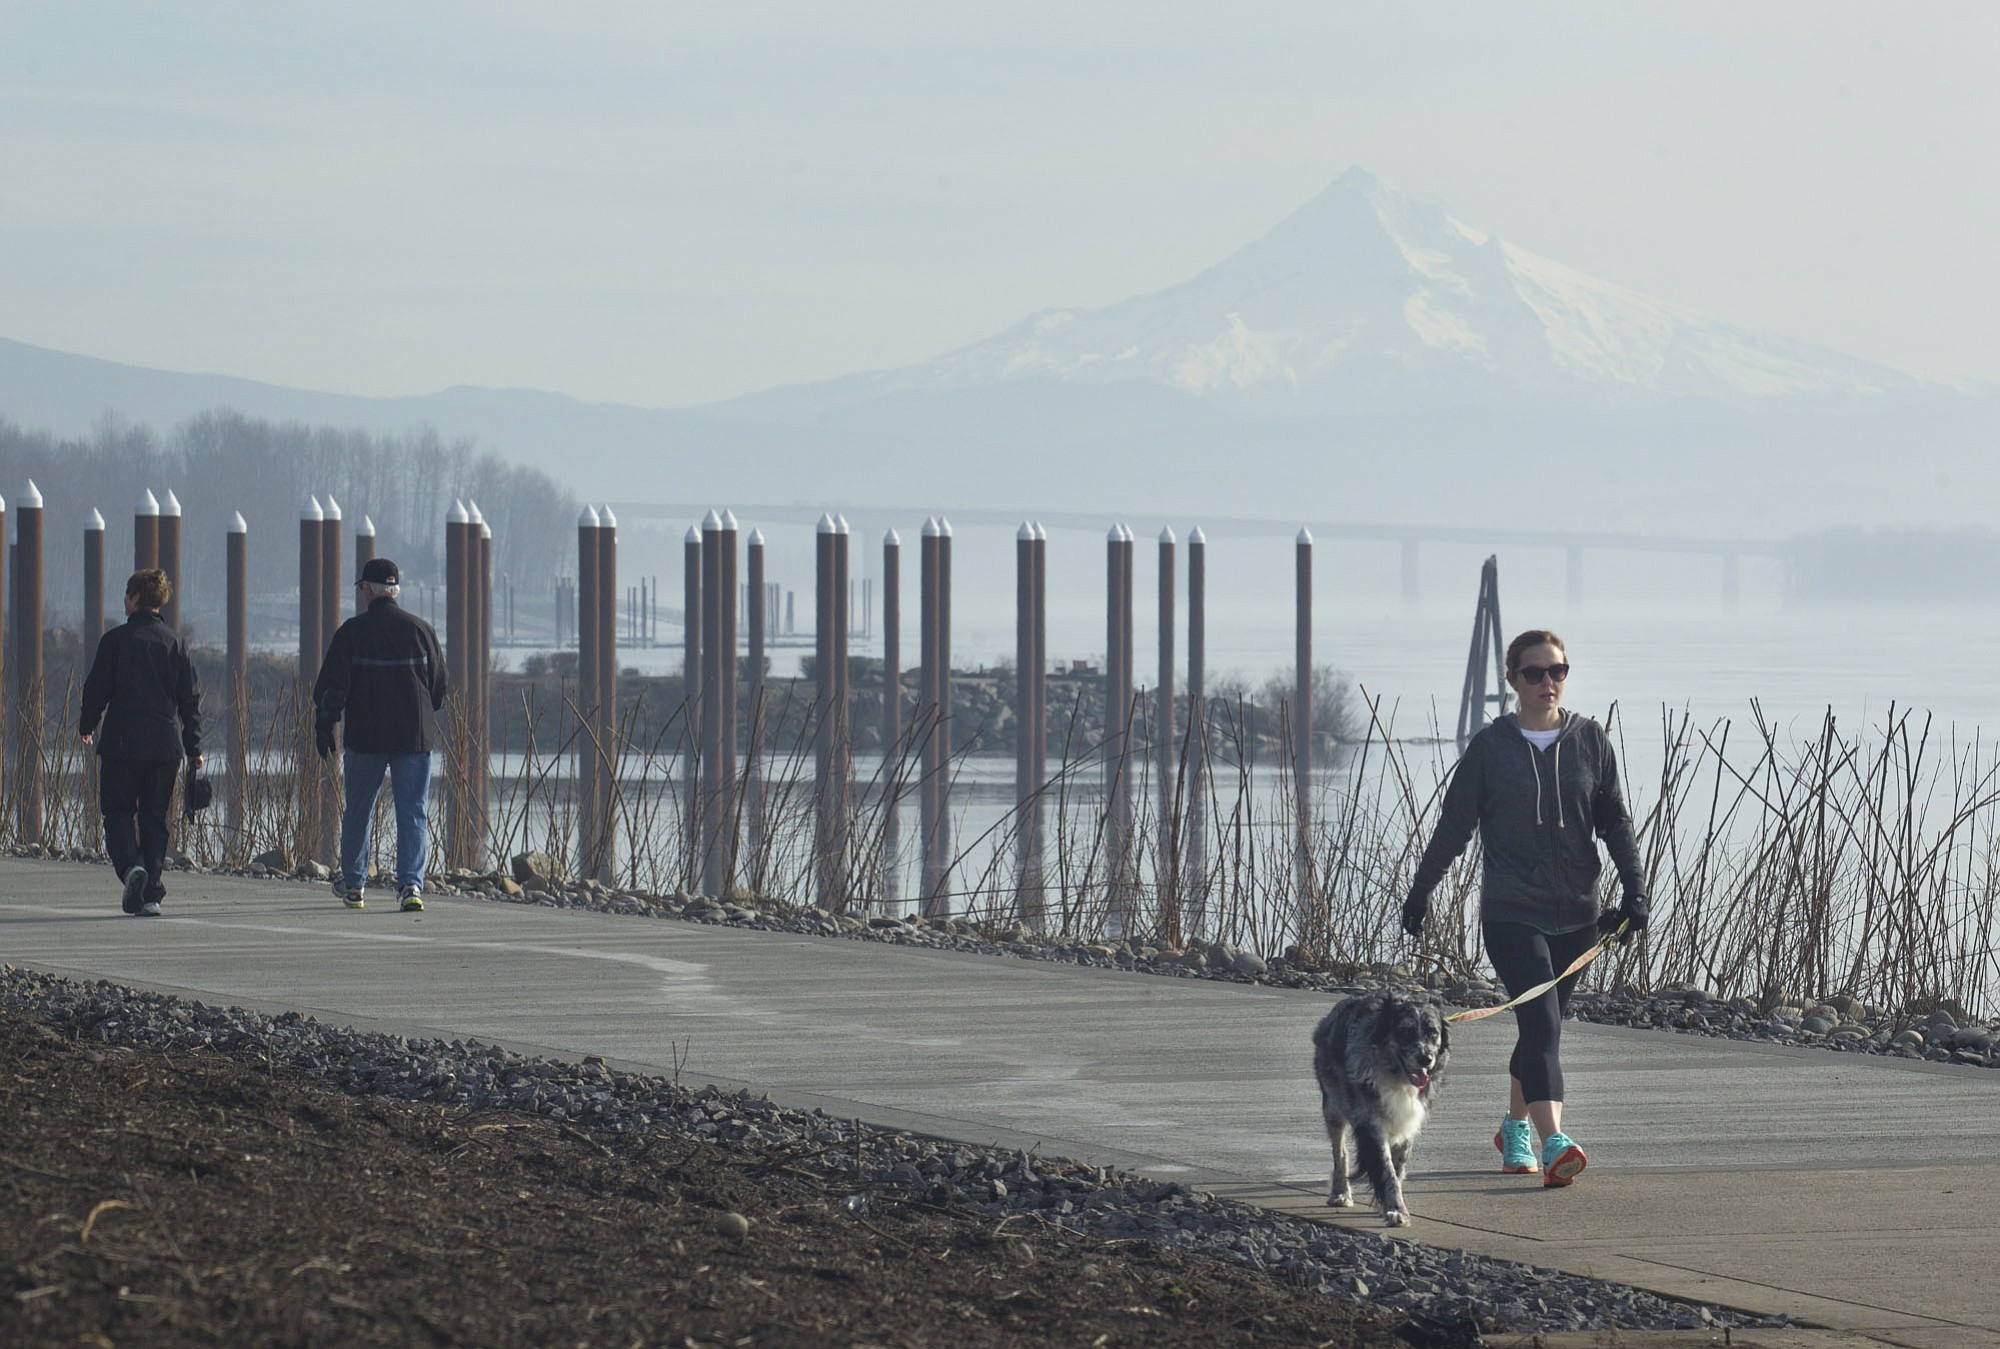 Briana McCartney walks with her dog, Gaia, along Vancouver's Waterfront Renaissance Trail, which reopened Friday after repairs to two sections damaged by high river flows in 2011 were completed.